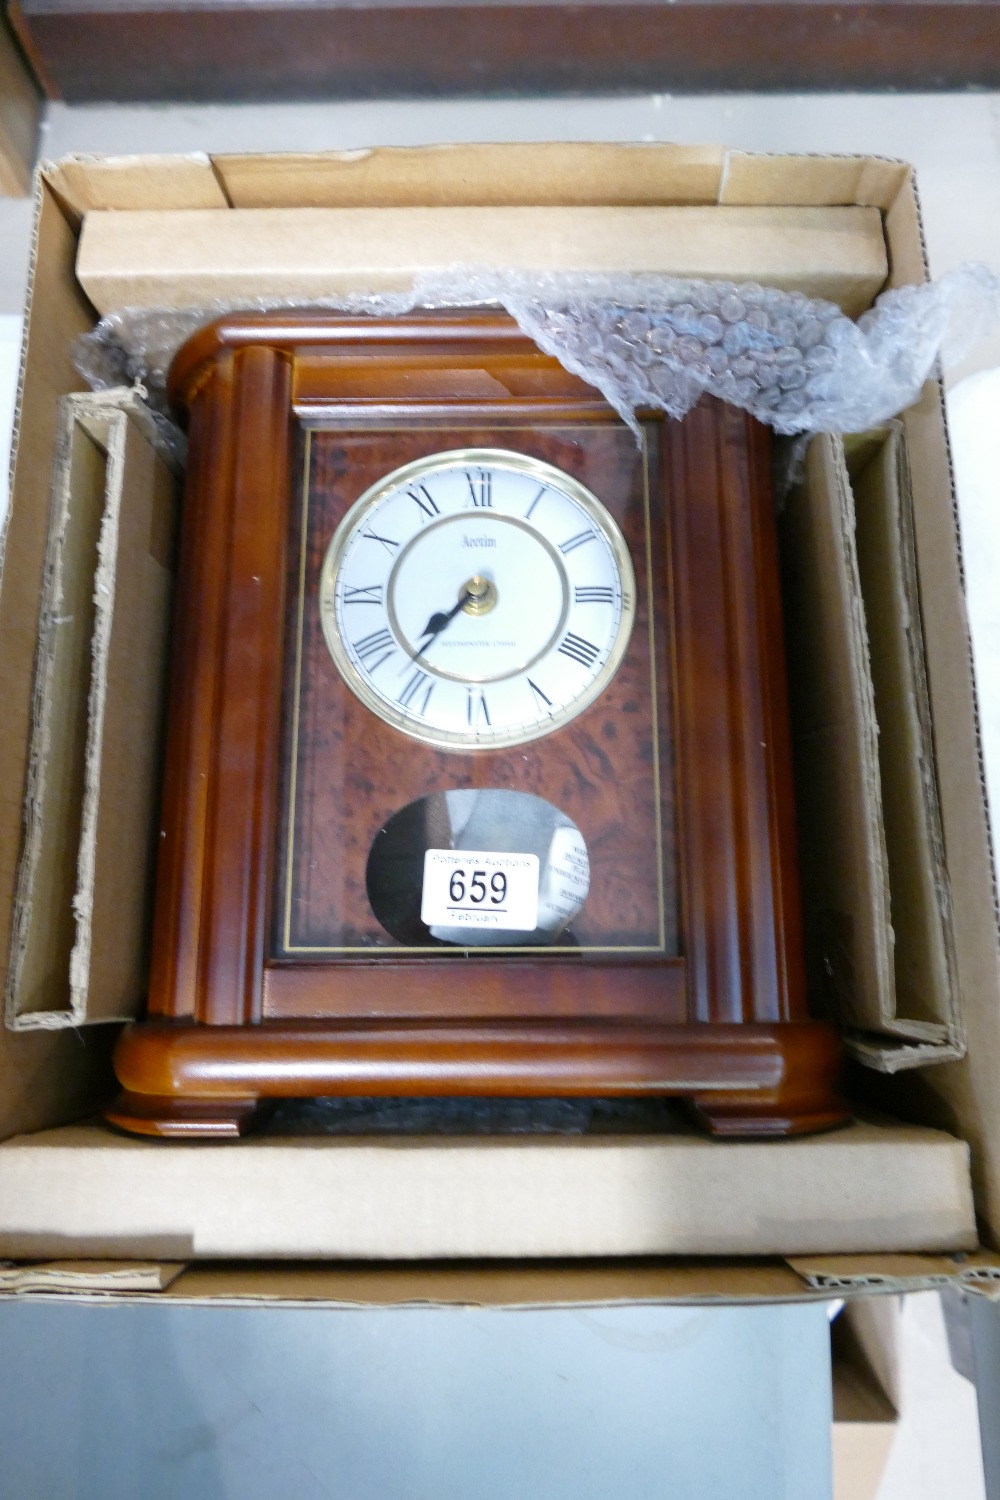 Acctim Westminster Chime Mantle Clock: